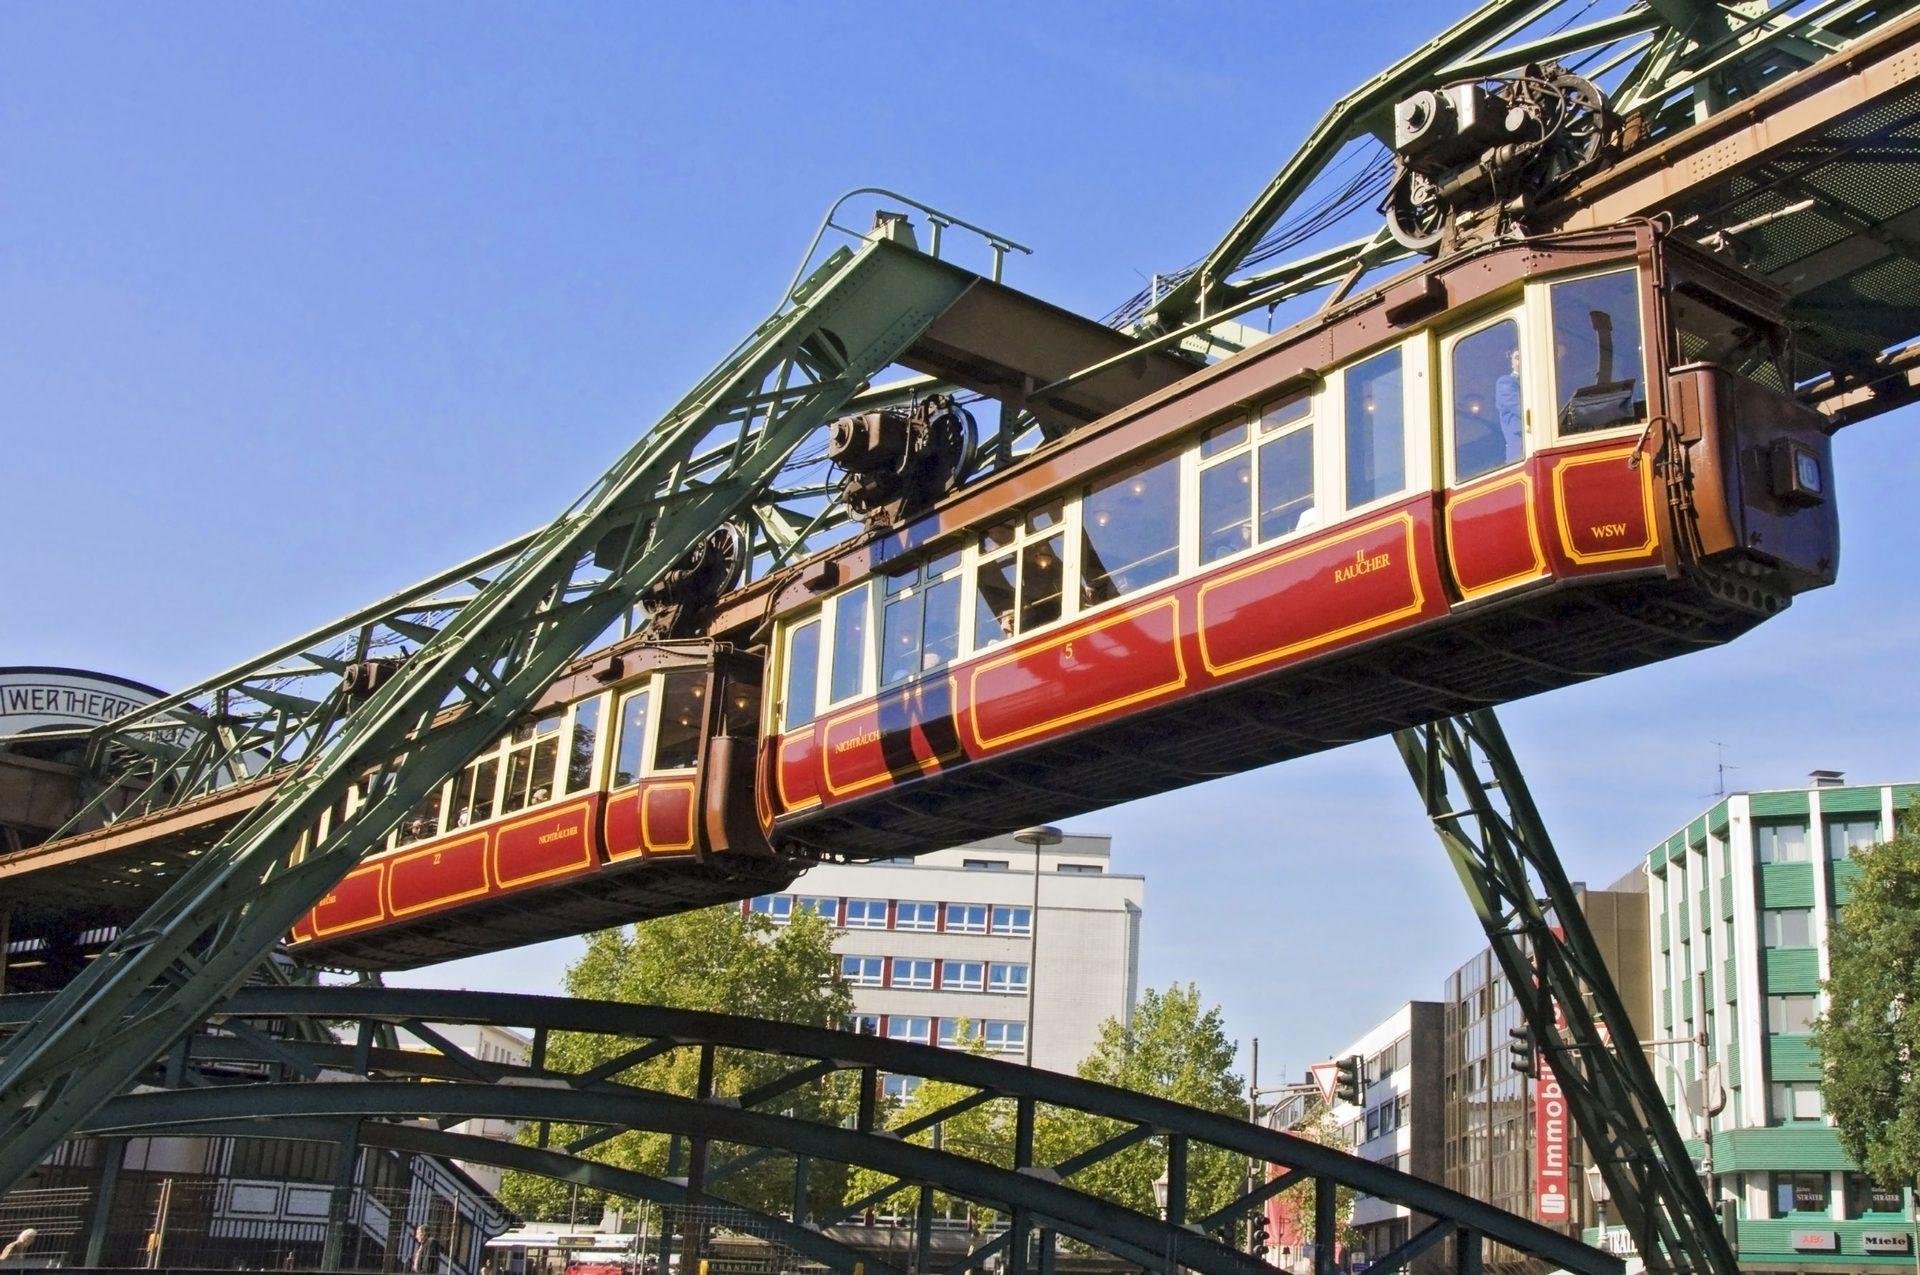 Photo of the new suspension railway over the Wupper